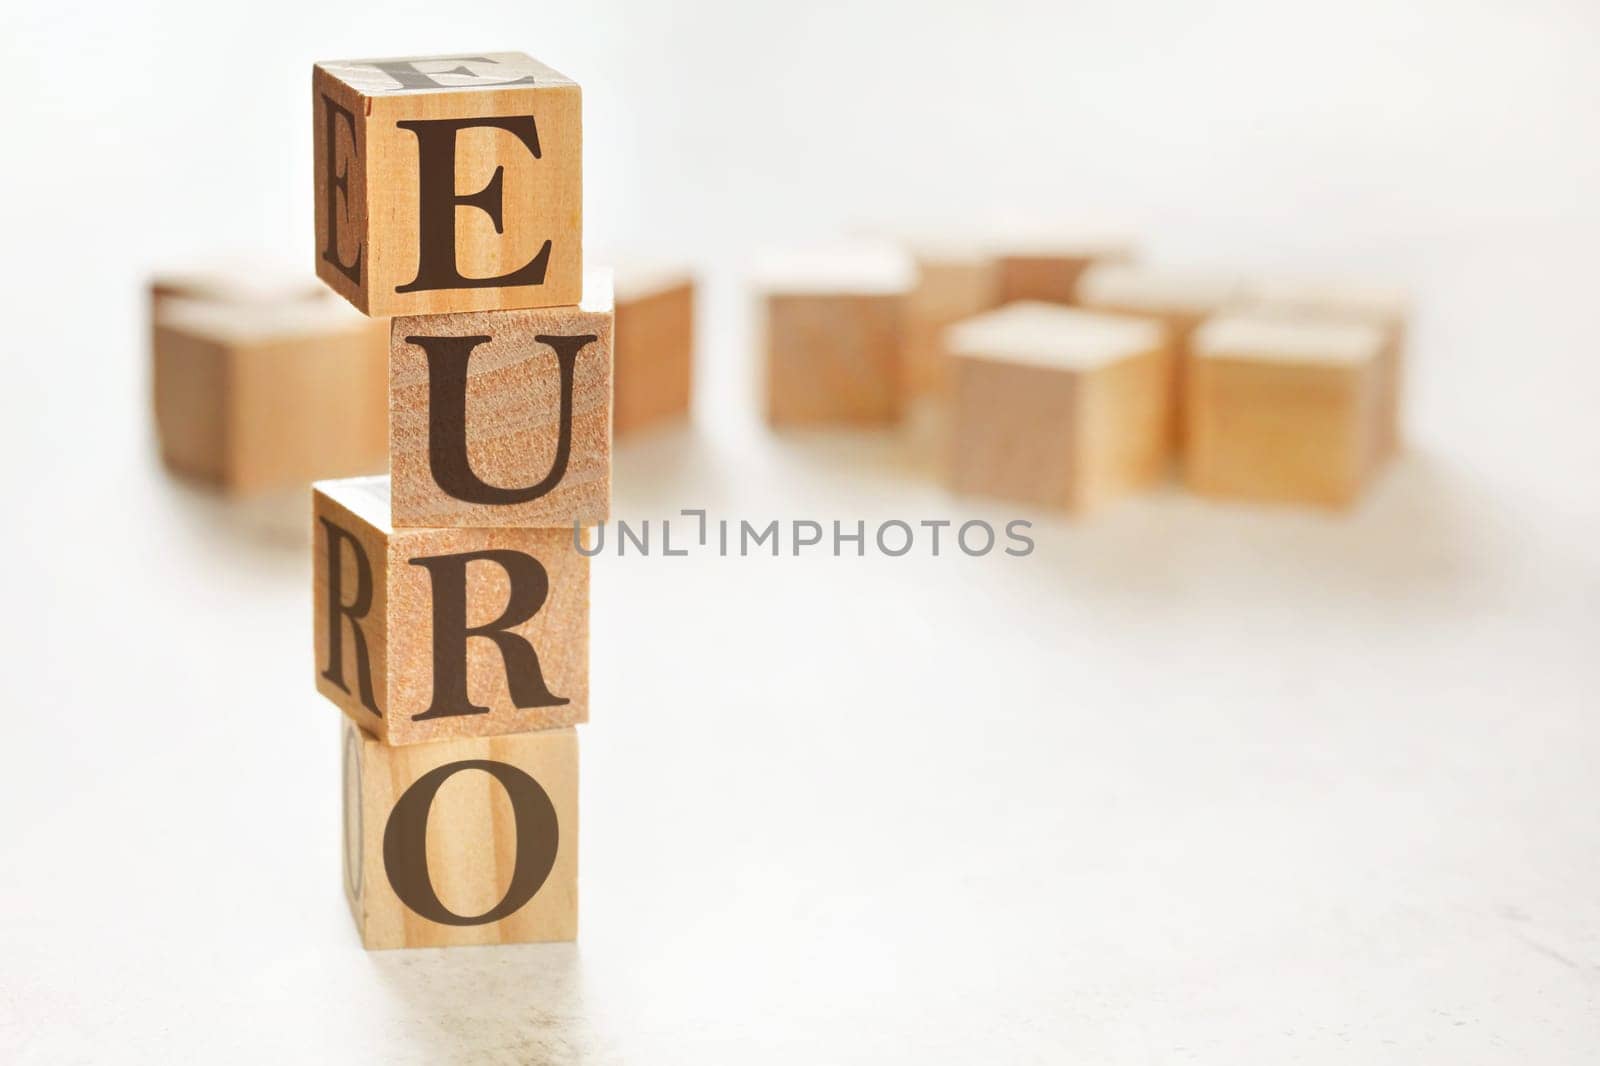 Four wooden cubes arranged in stack with word EURO on them, space for text / image at down right corner